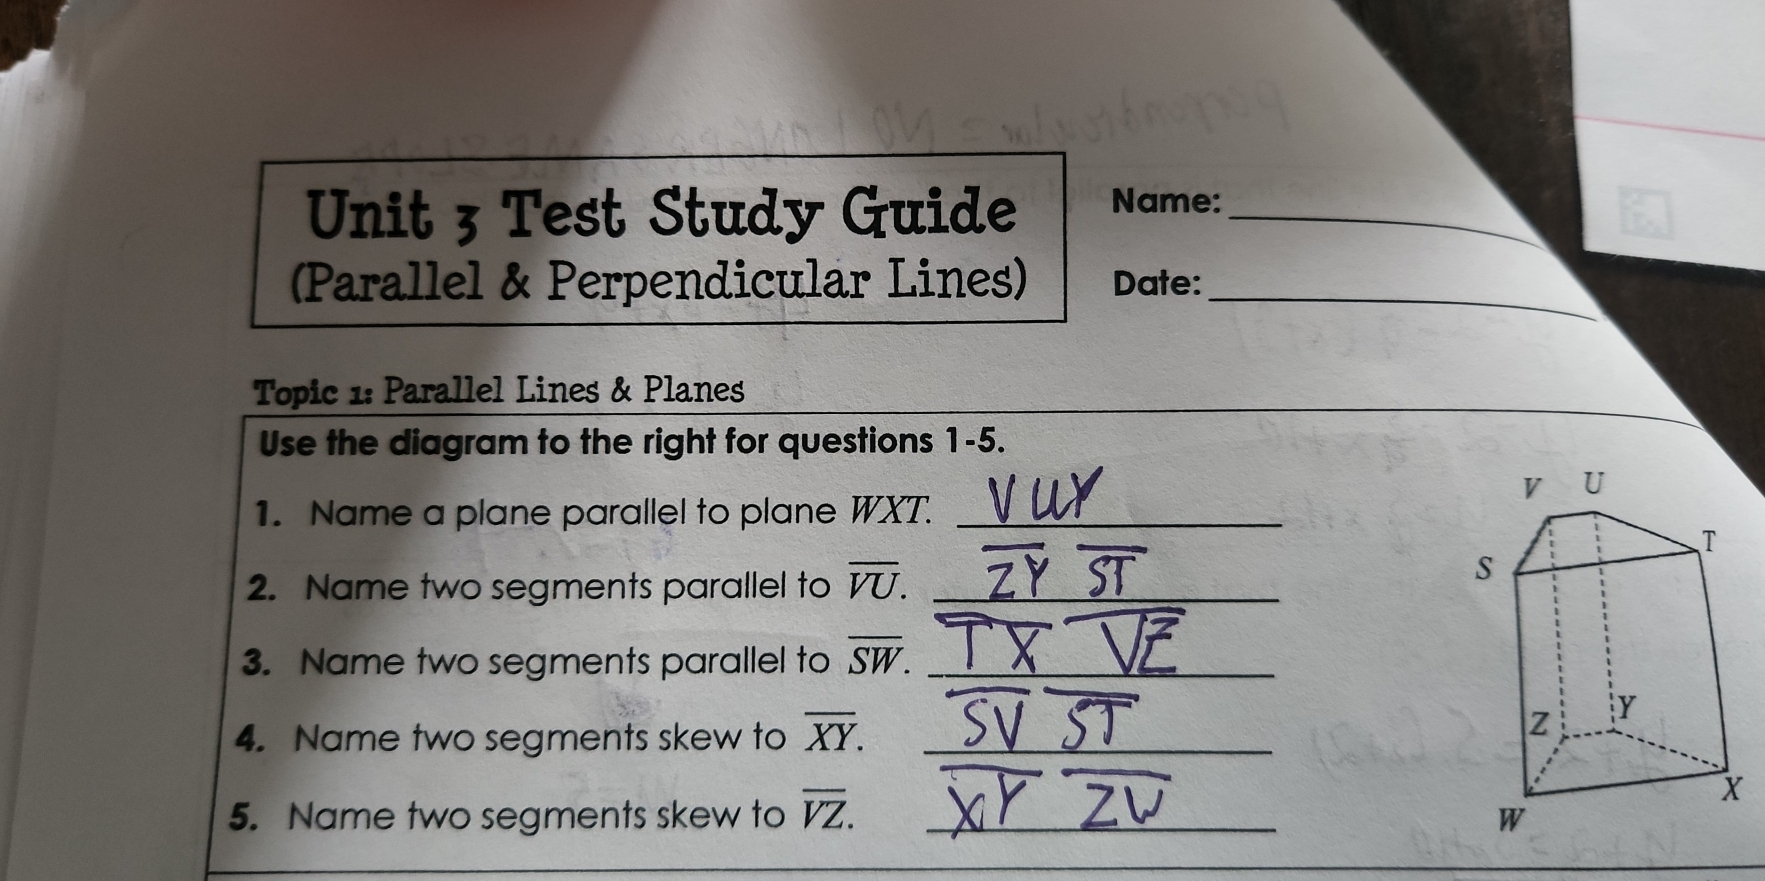 Unit 3 Test Study Guide Name:_ Parallel & Perpendicular Lines Date:_ Topic 1: Parallel Lines & Planes Use the diagram to the right for questions 1-5. 1. Name a plane parallel to plane WXT._ 2. Name two segments parallel to overline VU. _ 3. Name two segments parallel to overline SW. _ 4. Name two segments skew to overline XY. _ 5. Name two segments skew to overline VZ. _